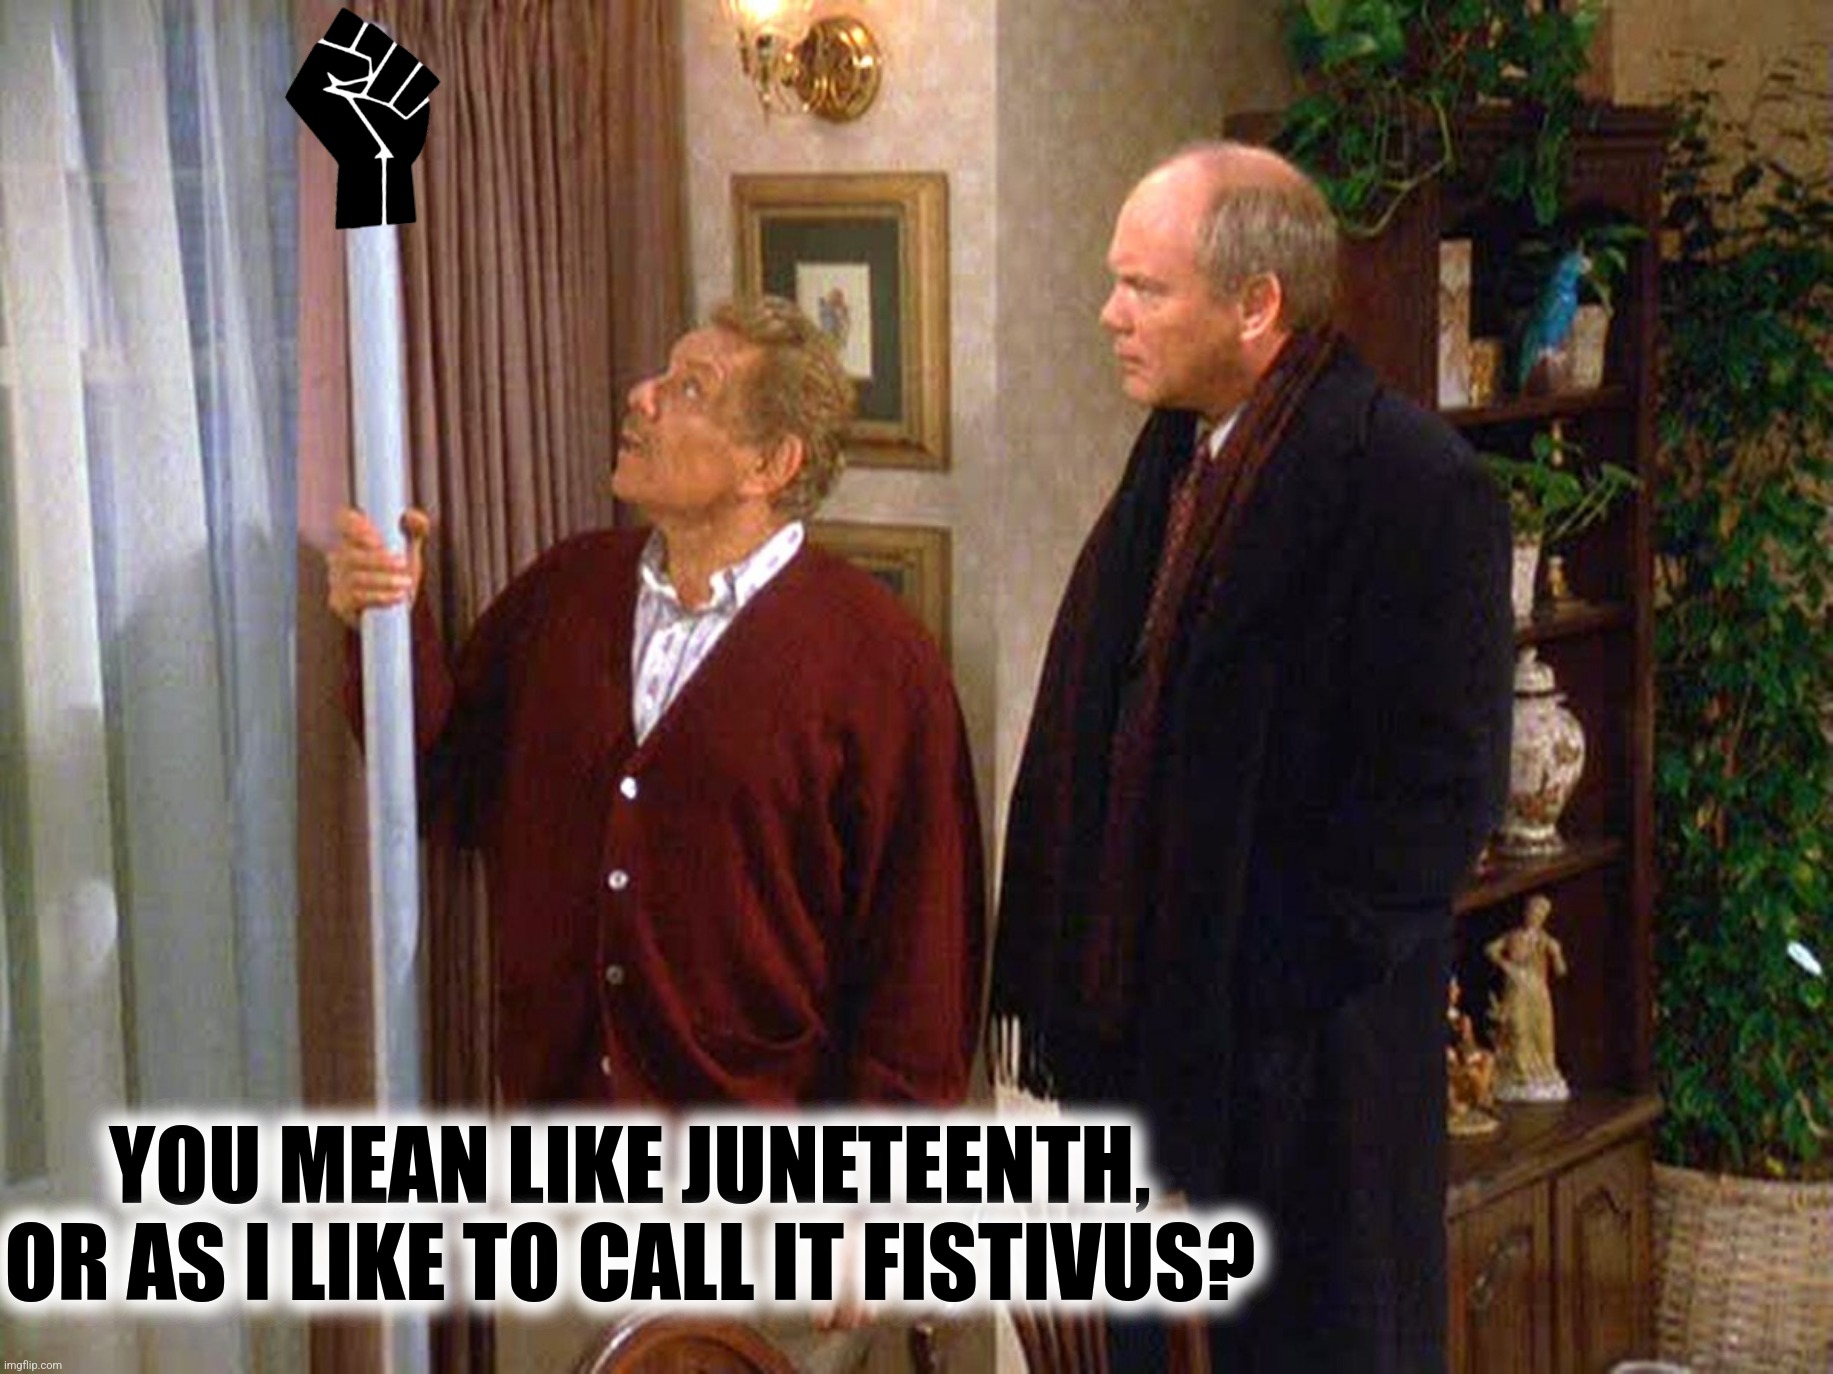 YOU MEAN LIKE JUNETEENTH, OR AS I LIKE TO CALL IT FISTIVUS? | made w/ Imgflip meme maker